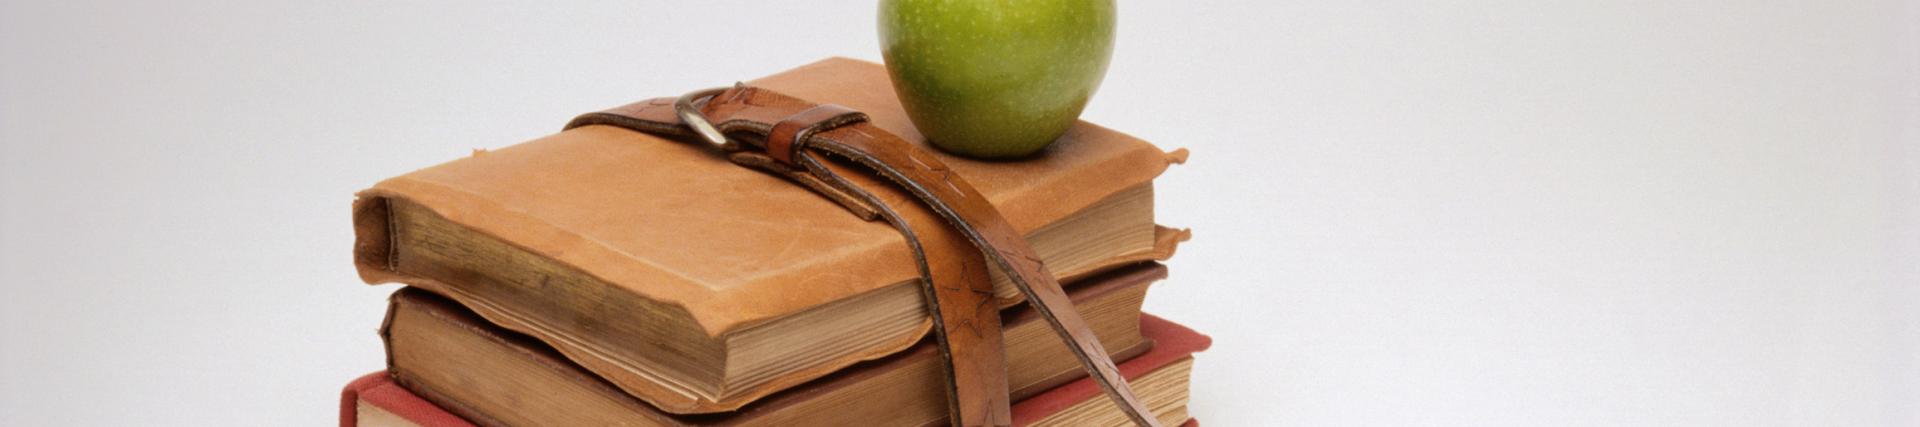 A green apple balanced on a stack of books